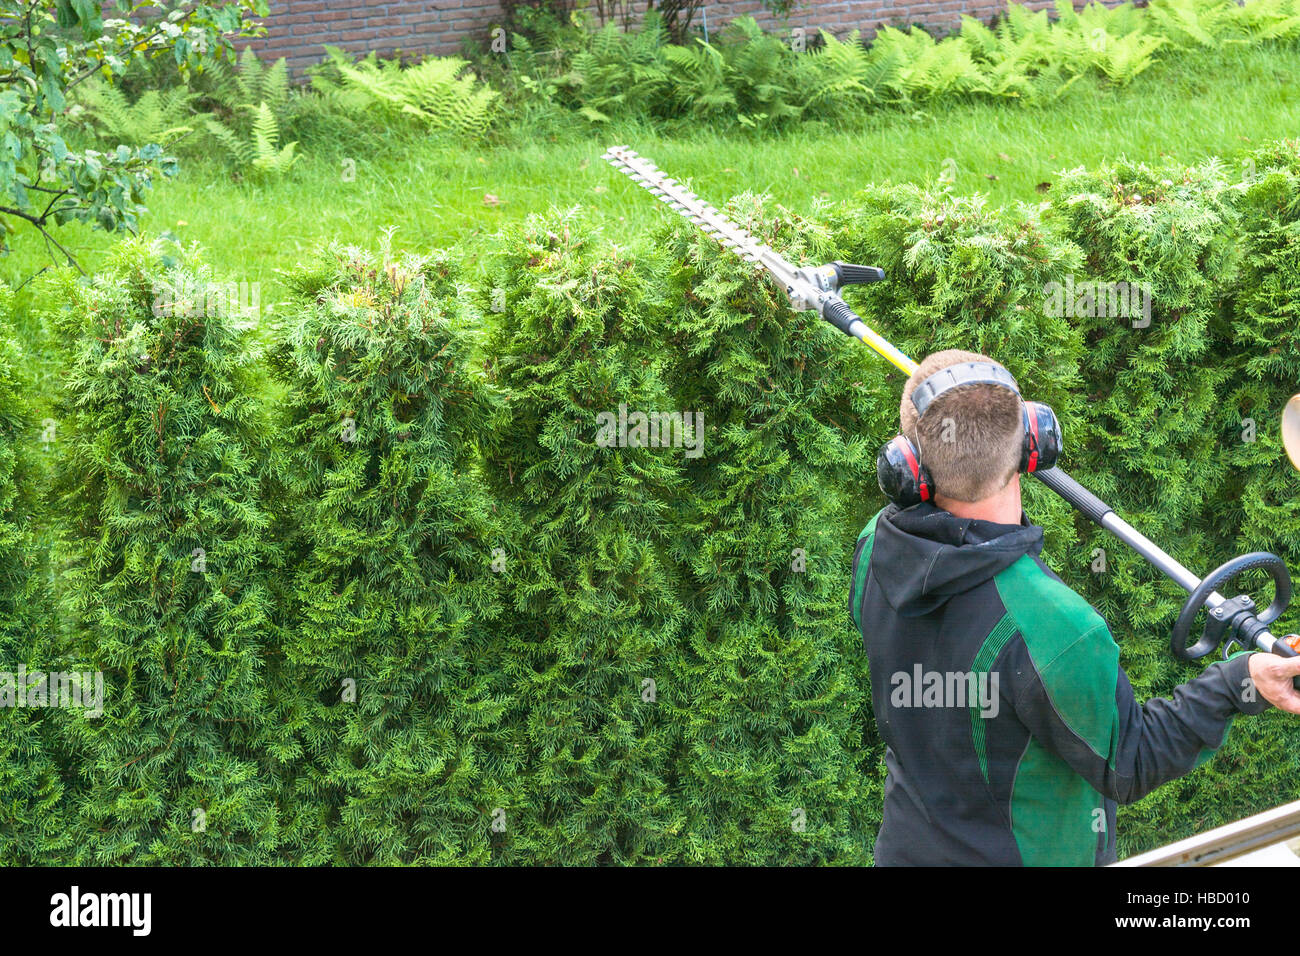 Hedge cutting petrol hedge trimmer. Stock Photo